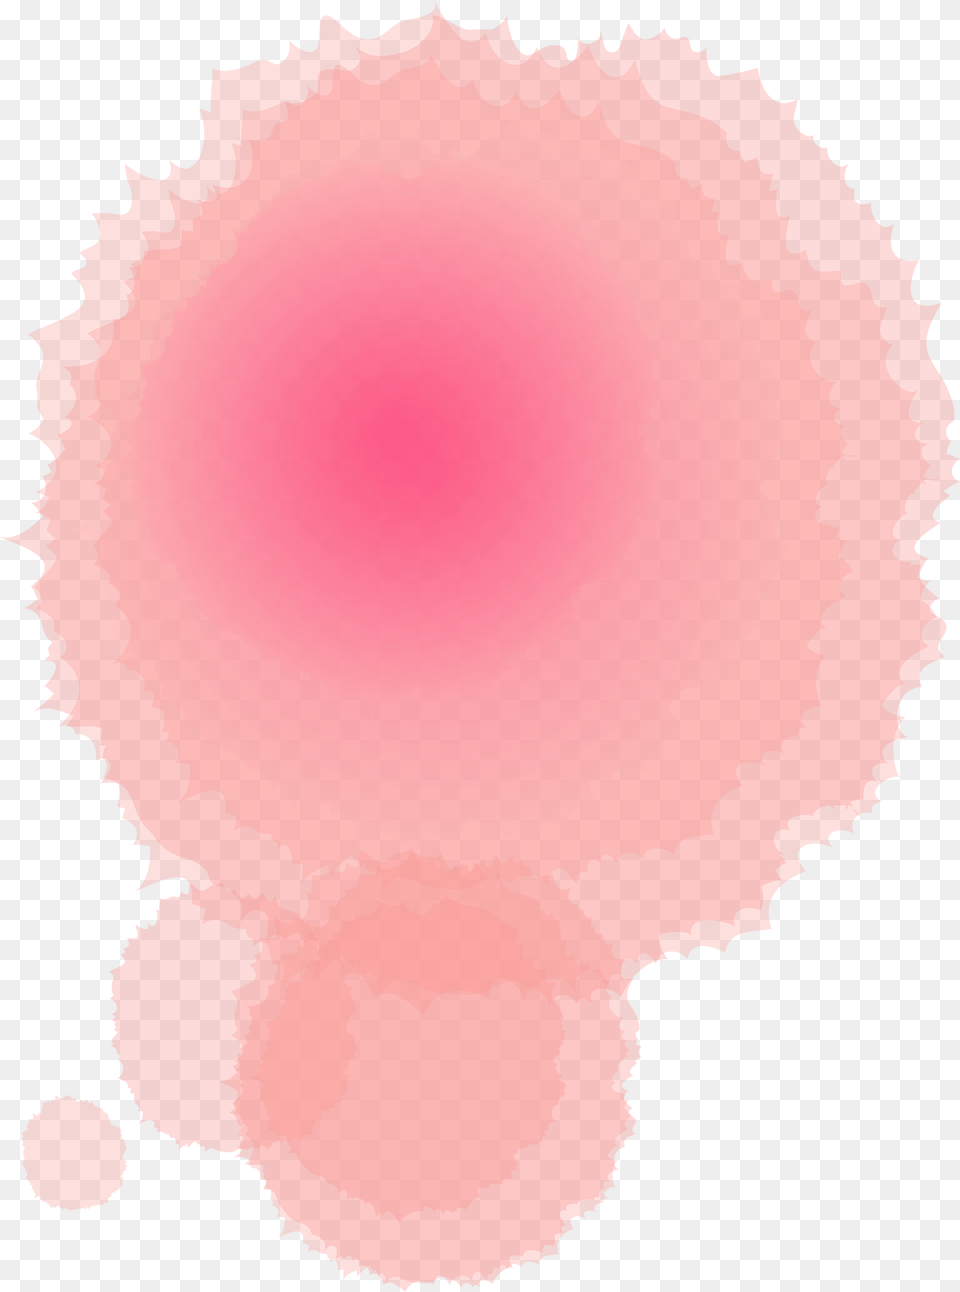 Pink Watercolor Circle Illustration, Stain Png Image